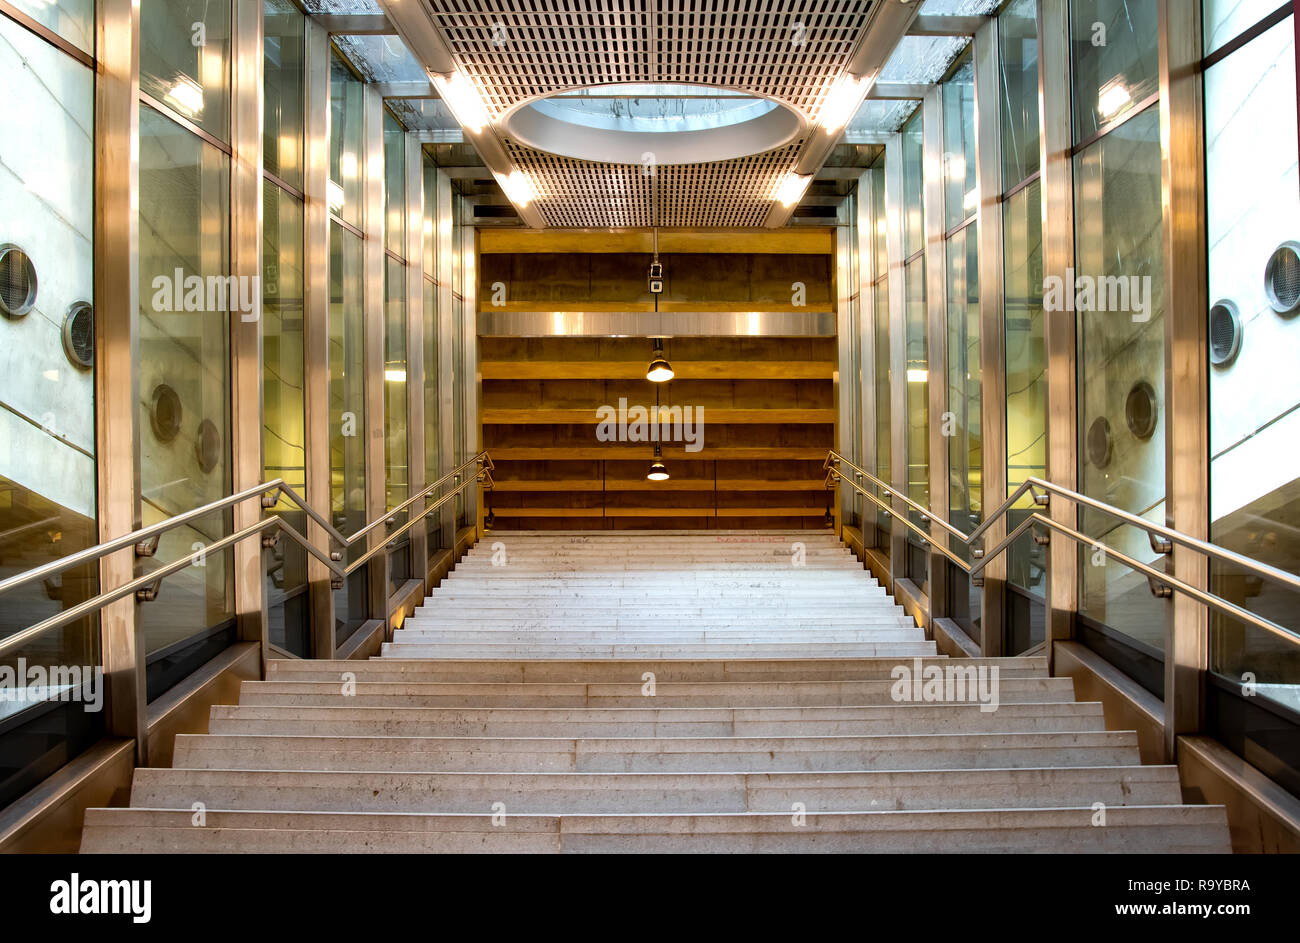 Front view of a staircase with metal railing leading to up Stock Photo